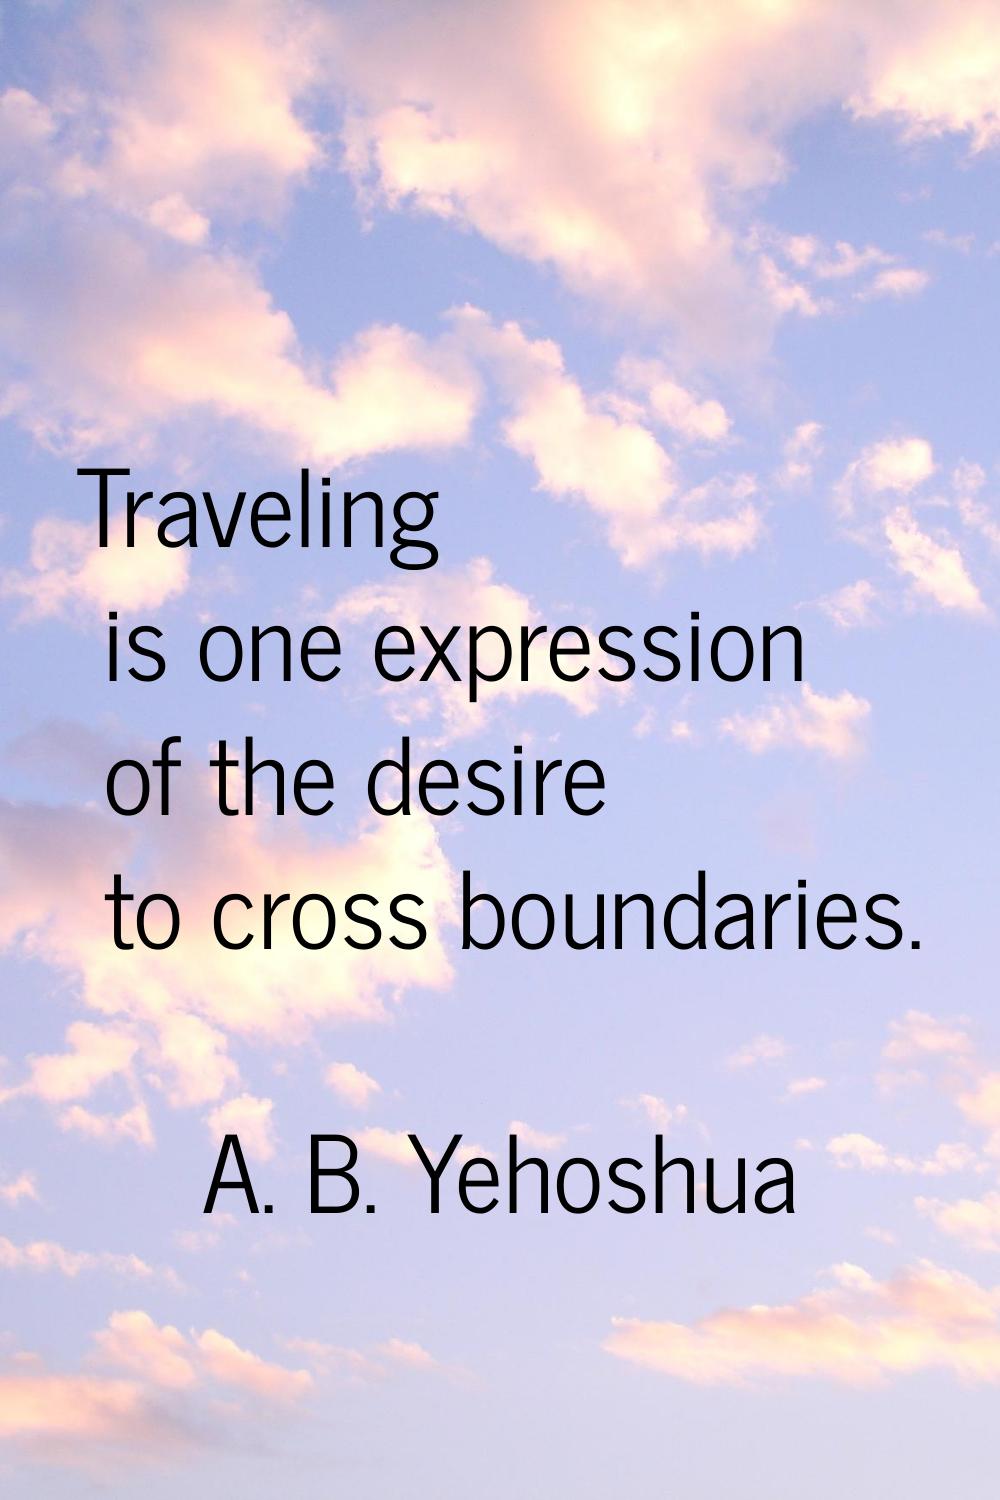 Traveling is one expression of the desire to cross boundaries.